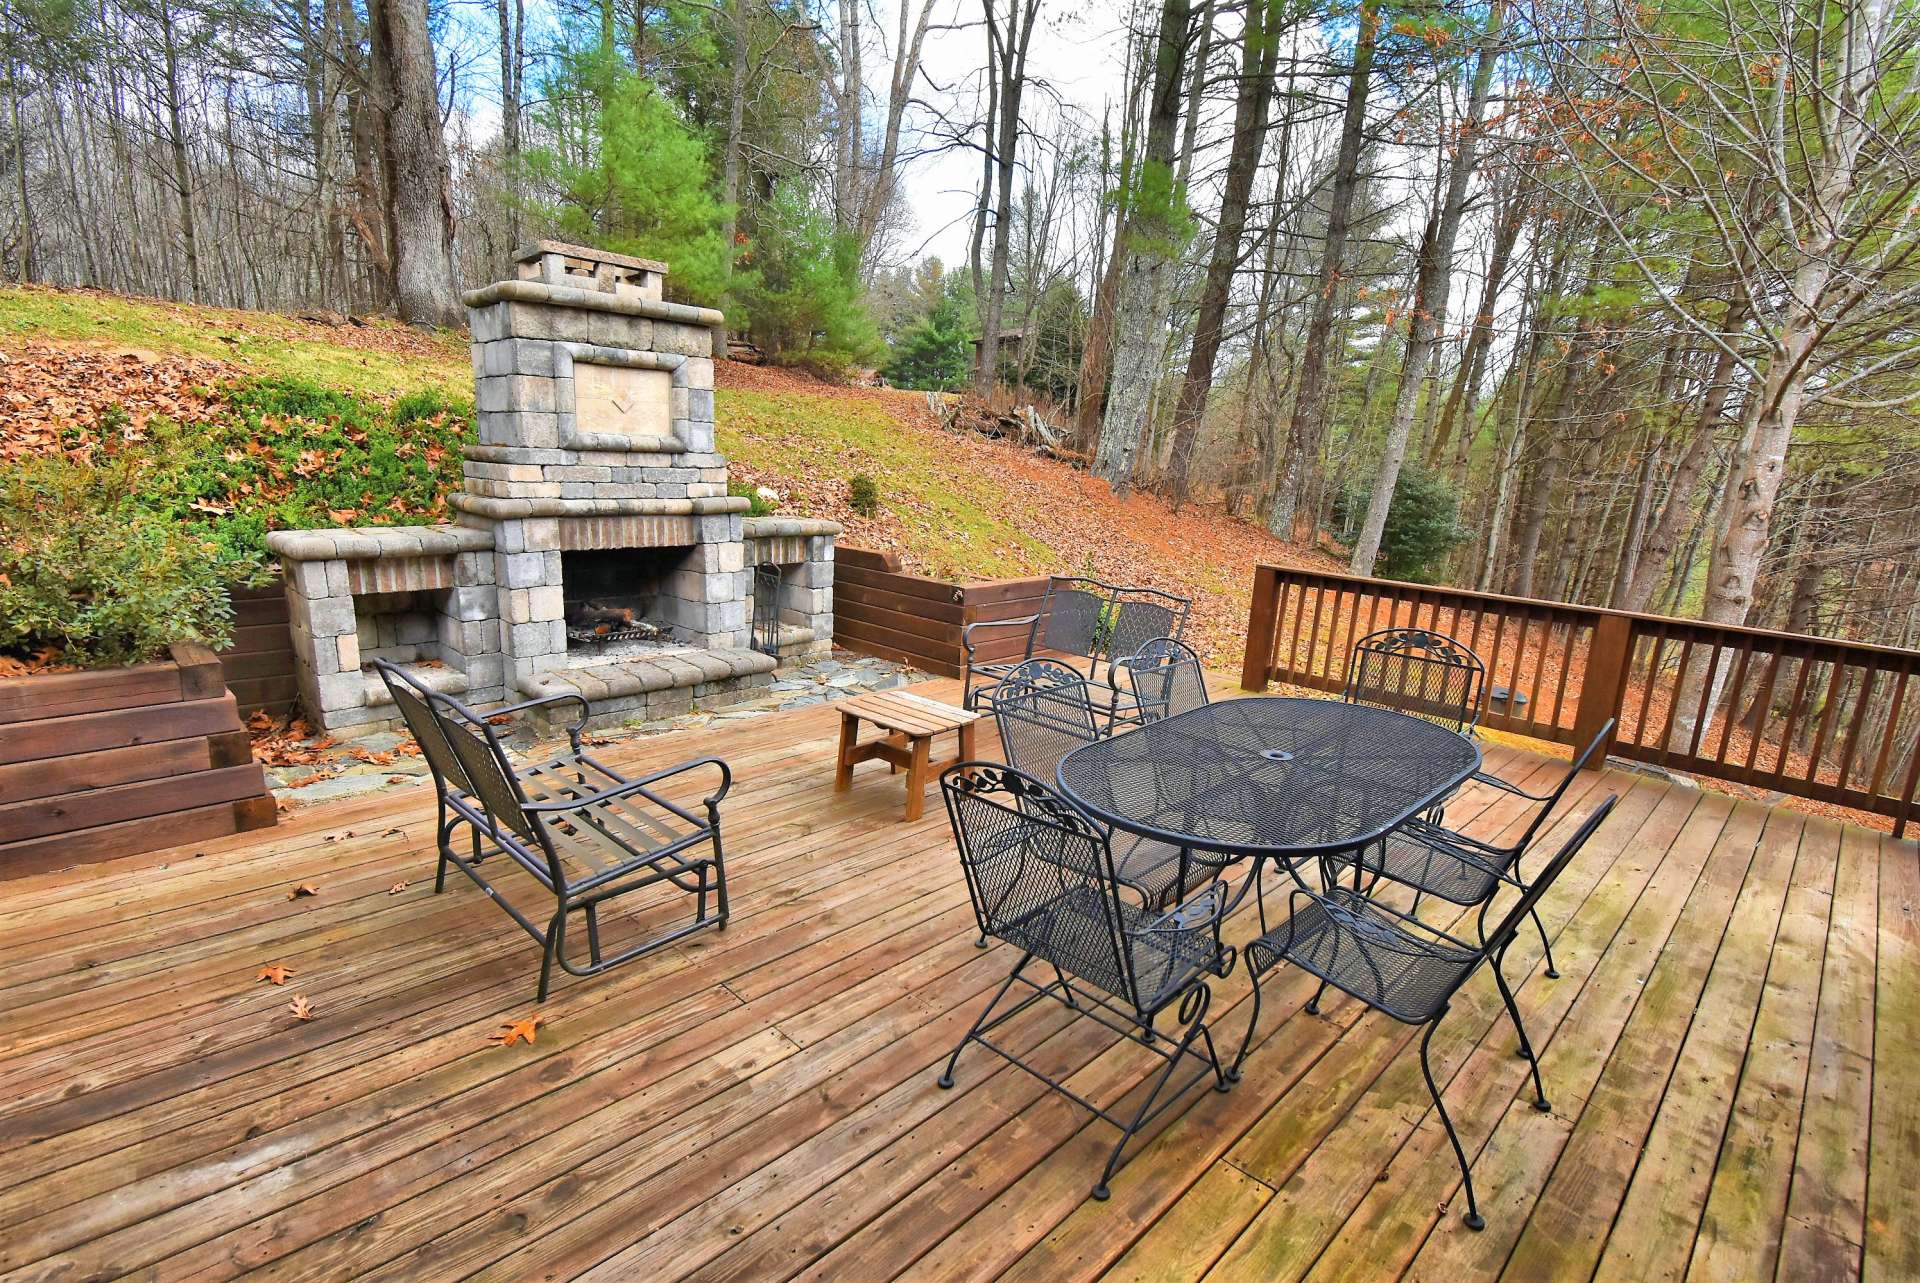 This wonderful open deck area with fireplace expands the outdoor living space.  You will love spending time with friends and family  sharing stories, making smores, and making memories.